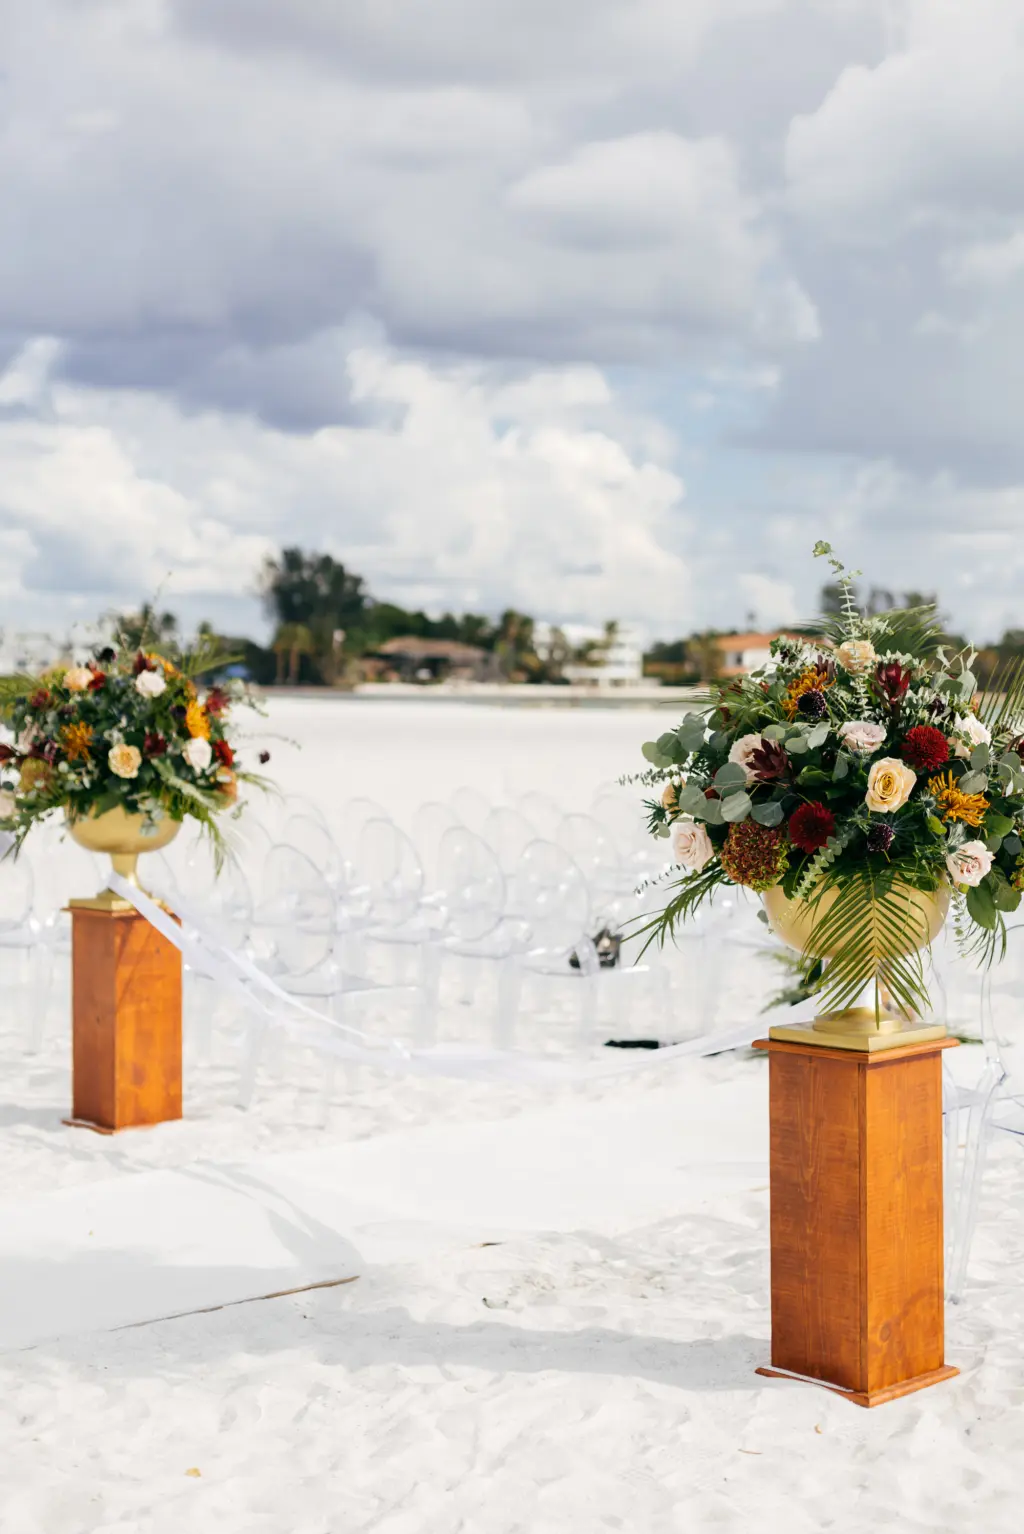 Moody Fall Black Tie Beach Wedding Ceremony Decor Inspiration | Jewel Tone Floral Arrangements in Gold Vases on Columns at Ceremony Aisle